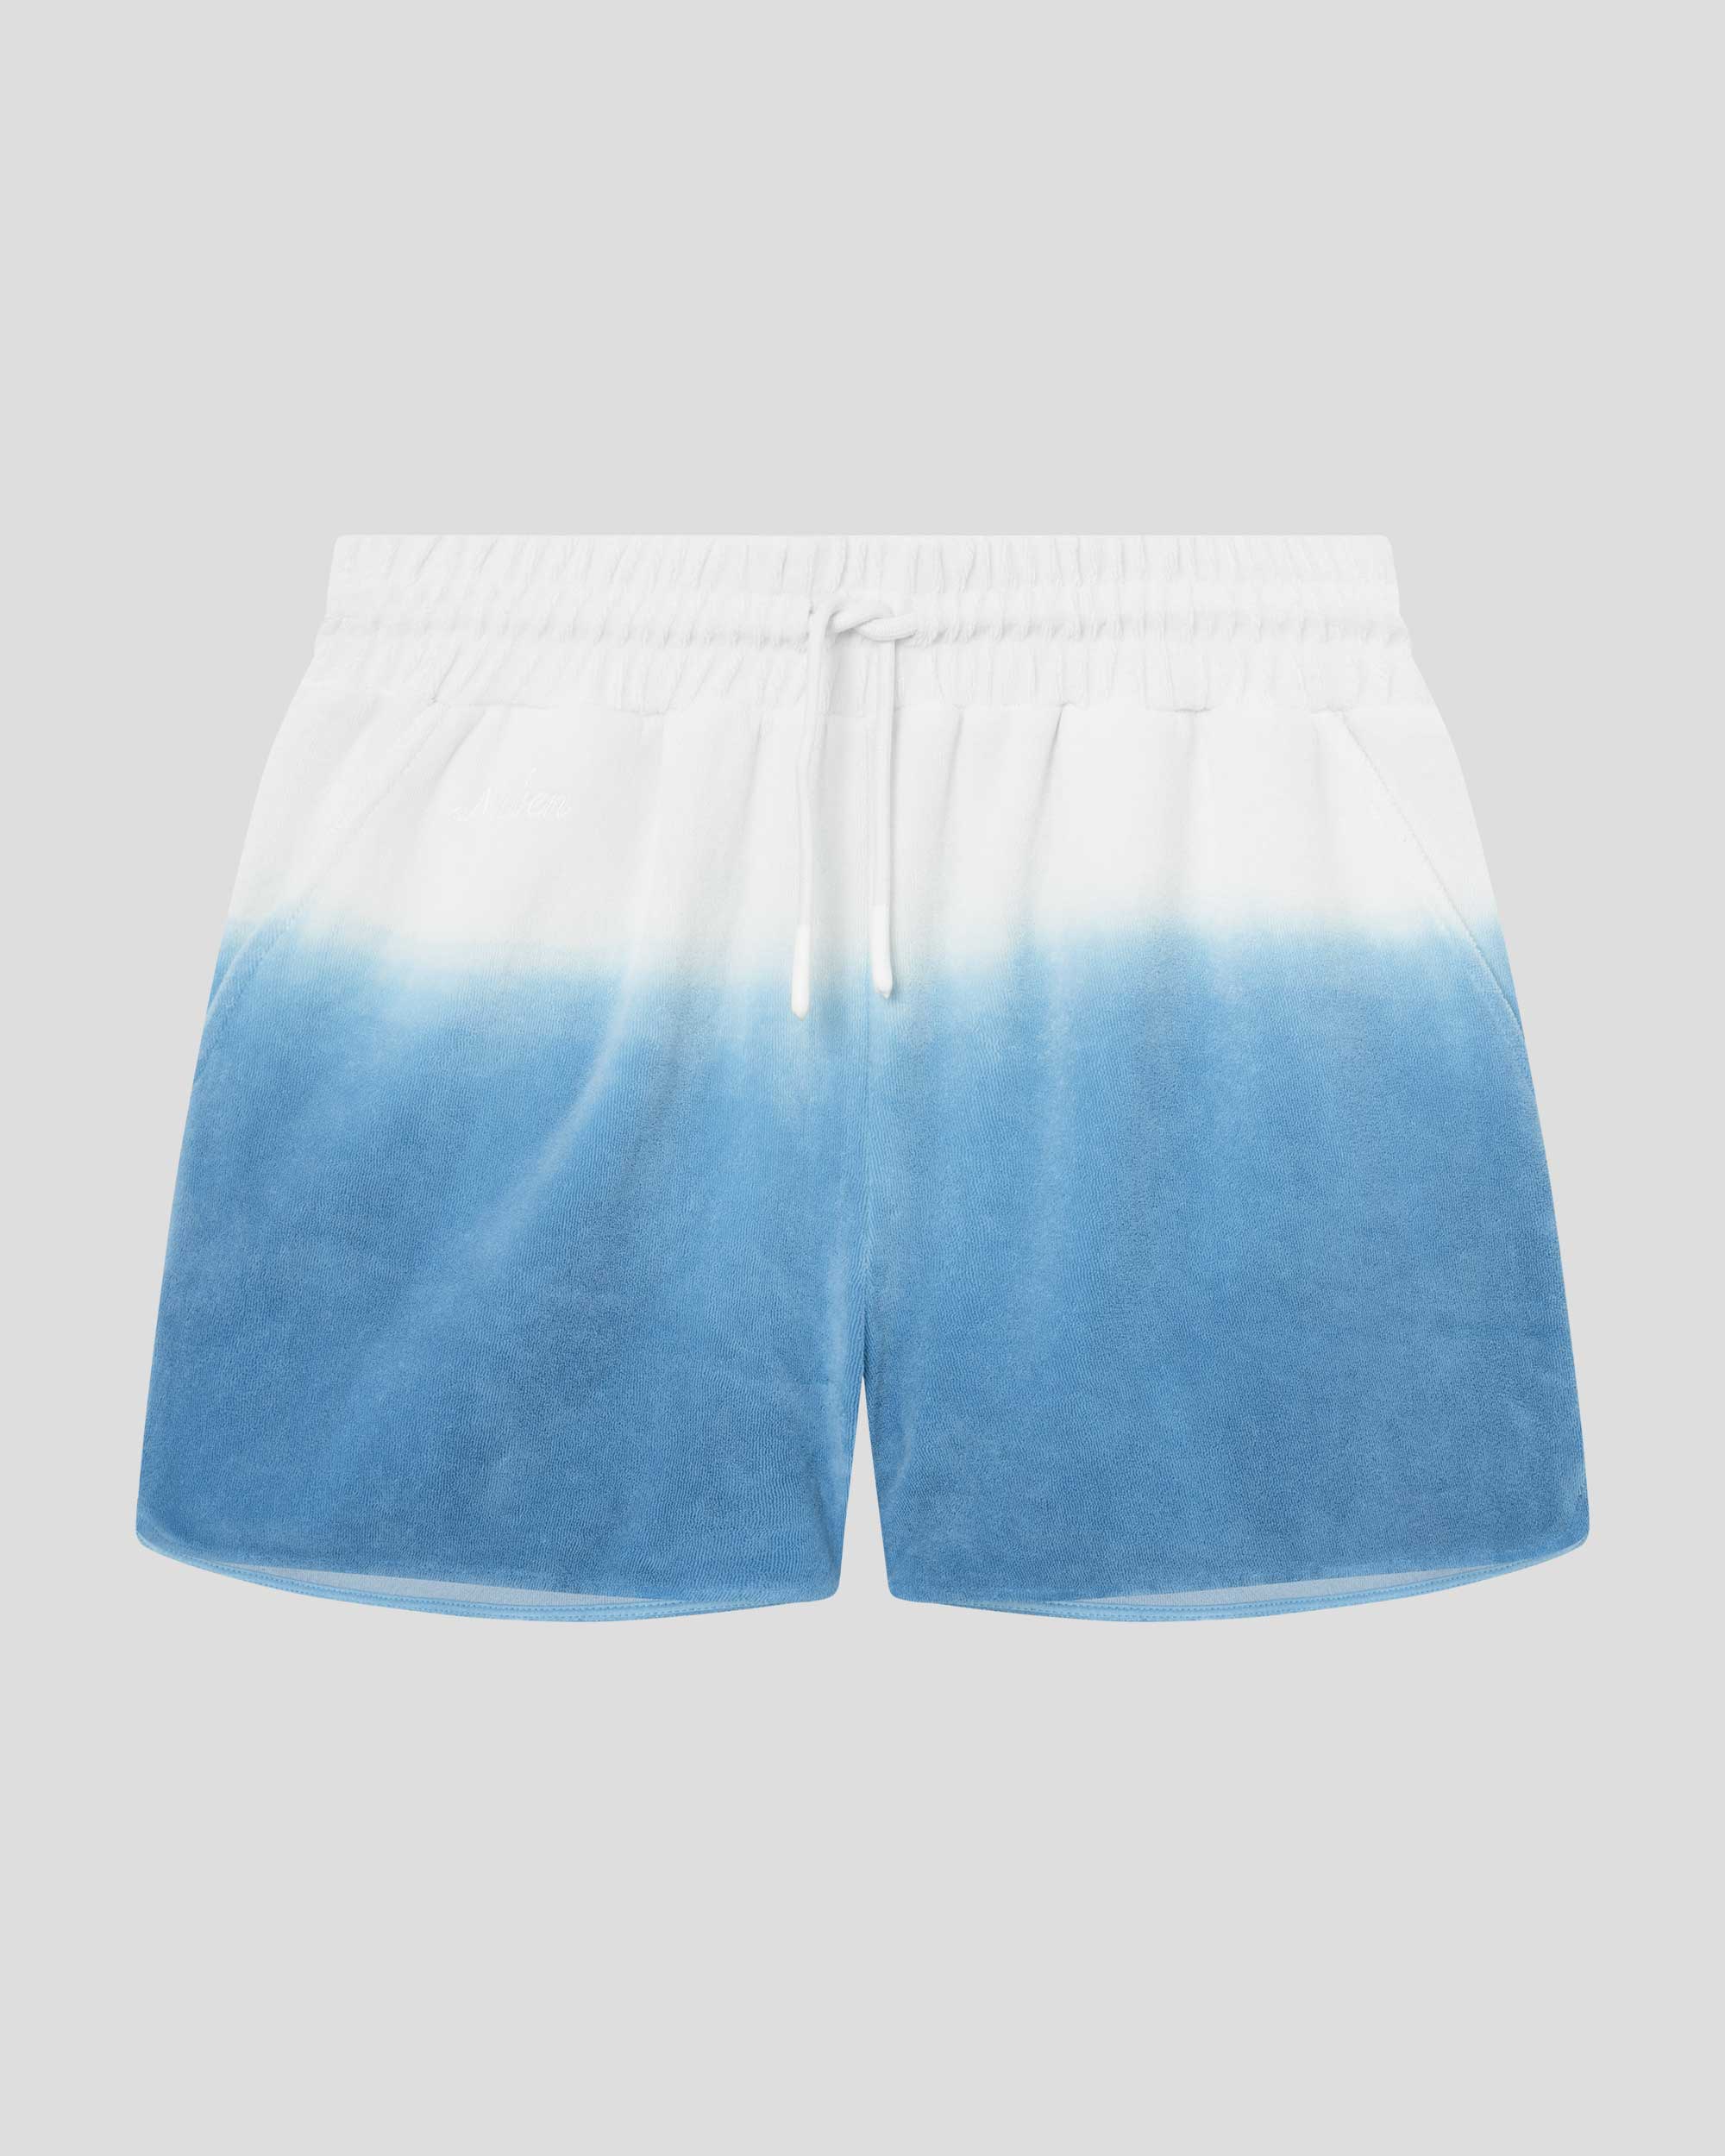 White and sky blue low cut shorts in terry toweling fabric with drawstring and two side pockets.